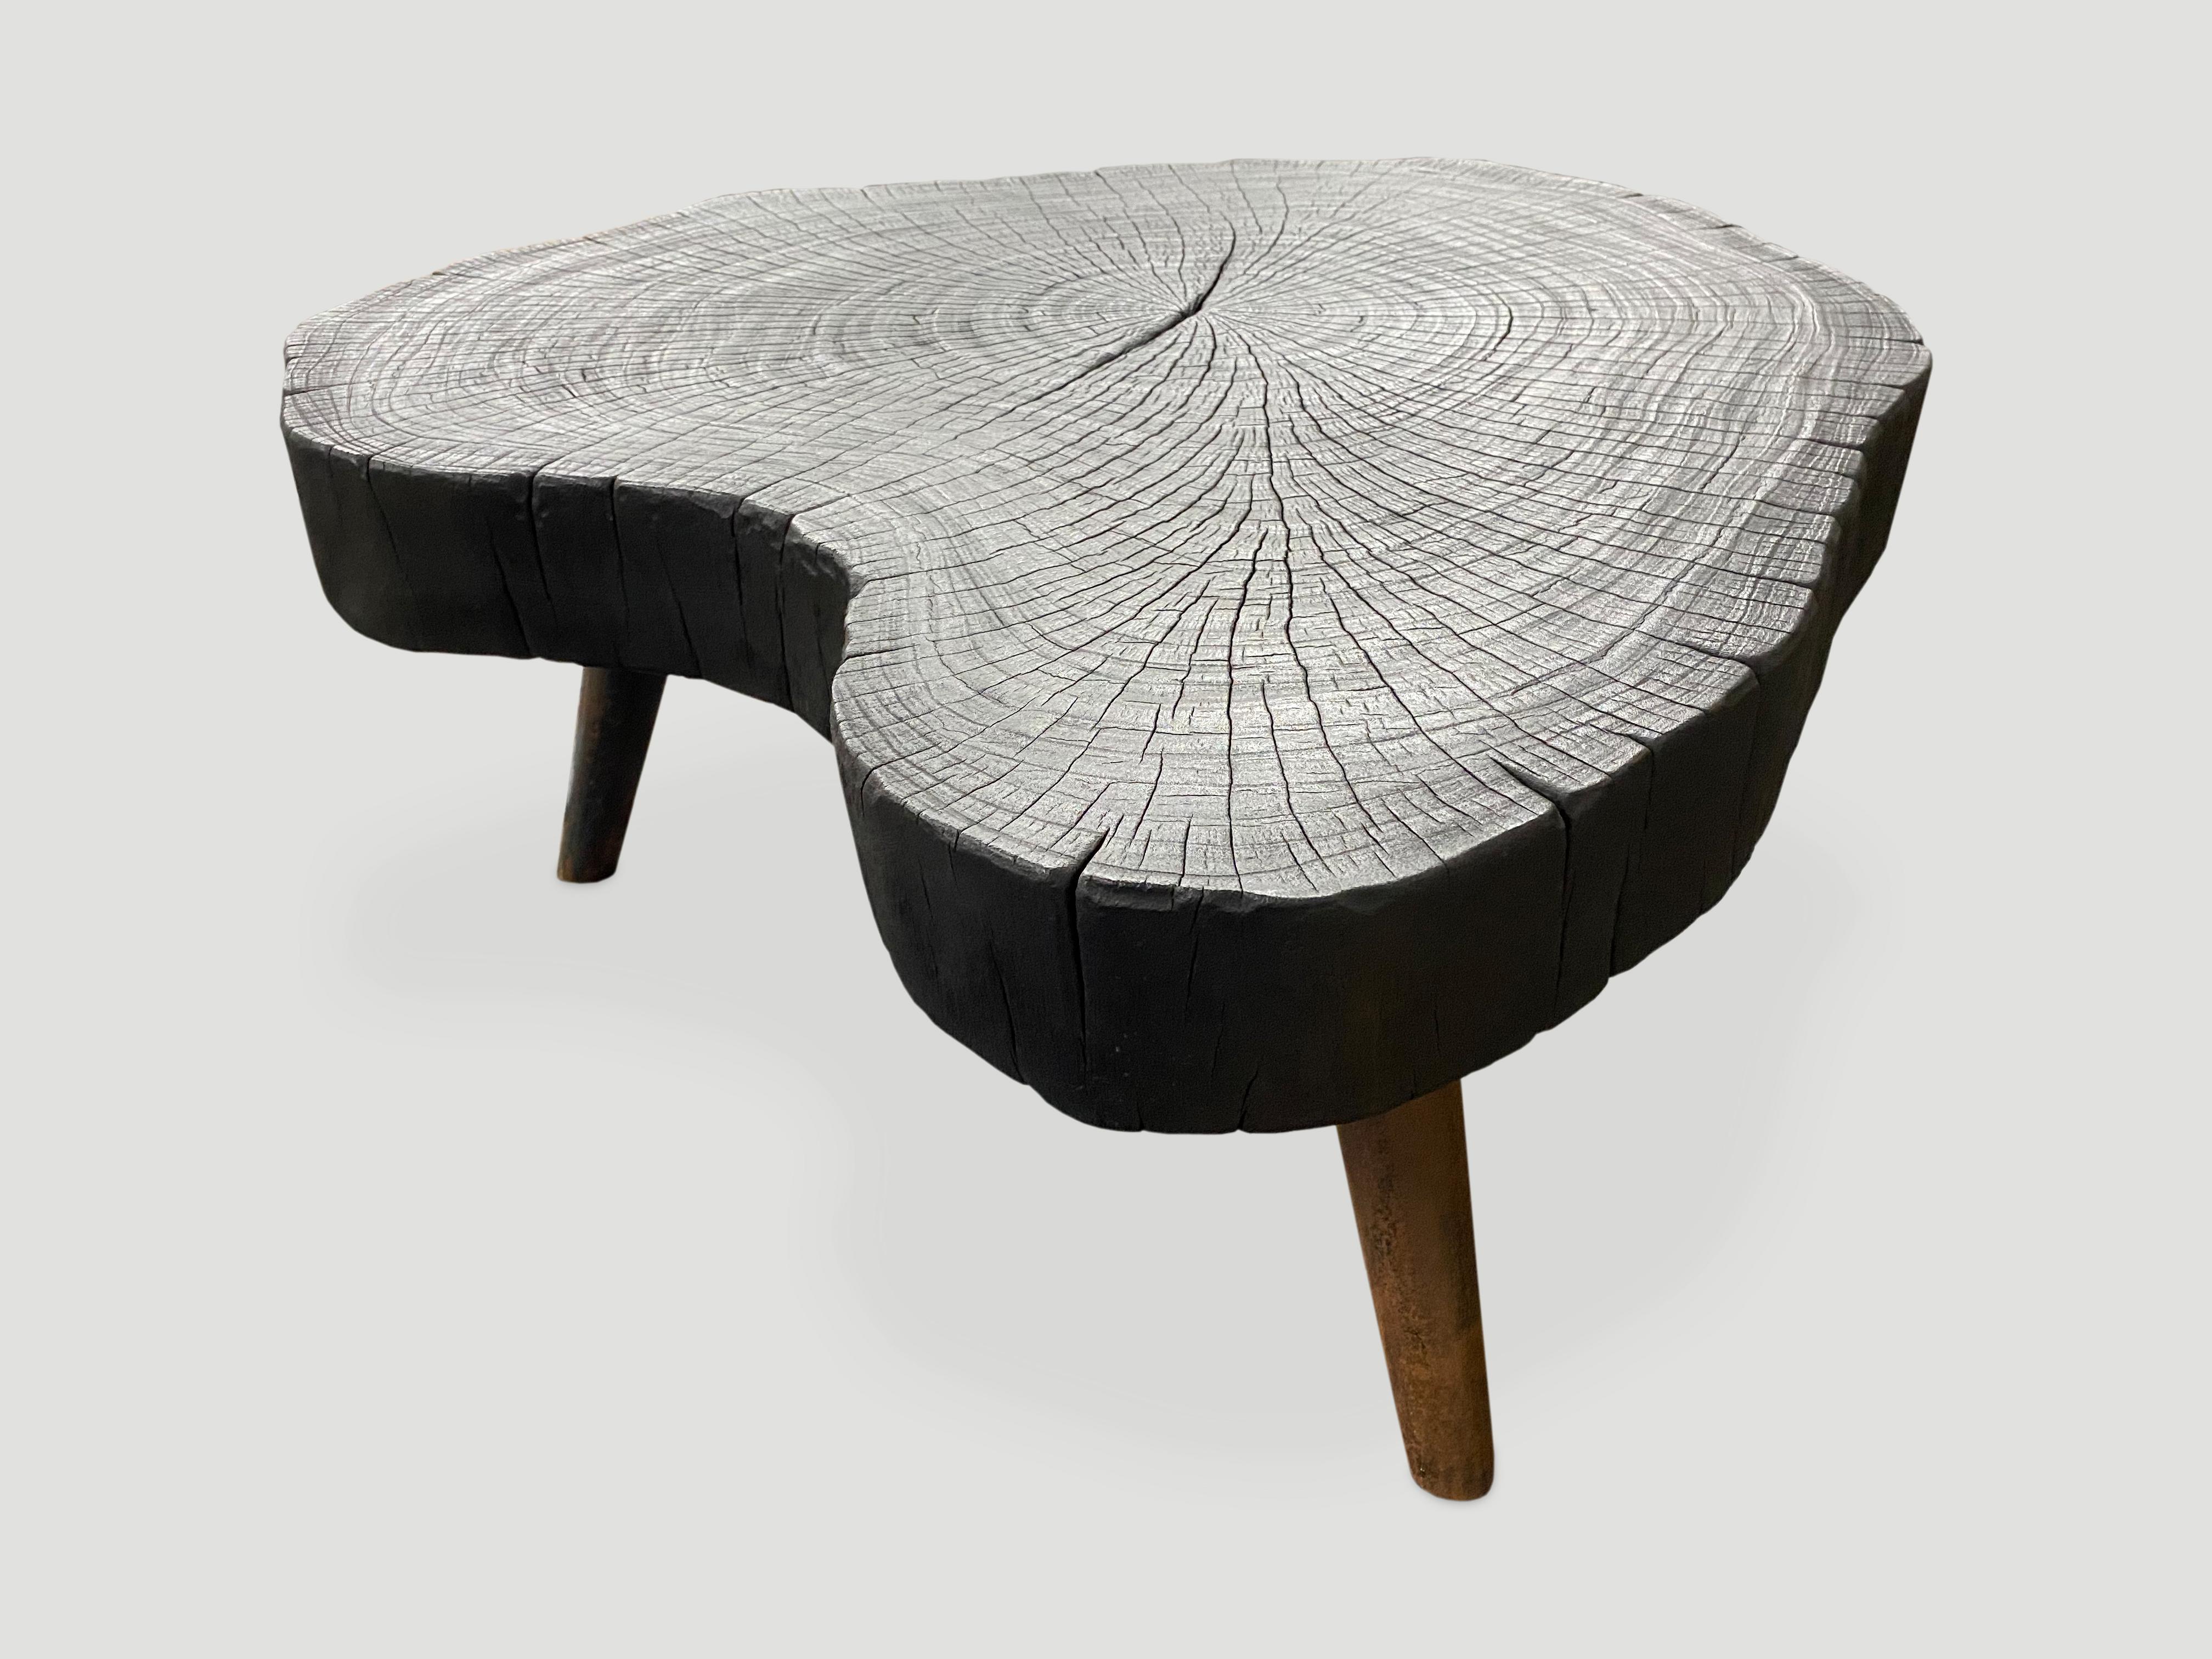 Single four inch slab coffee table. Charred and set on a midcentury style burnt metal base, which we can also finish in pure black if preferred. We have a pair available, sliced from the same log. The price and size reflect the one shown.

The